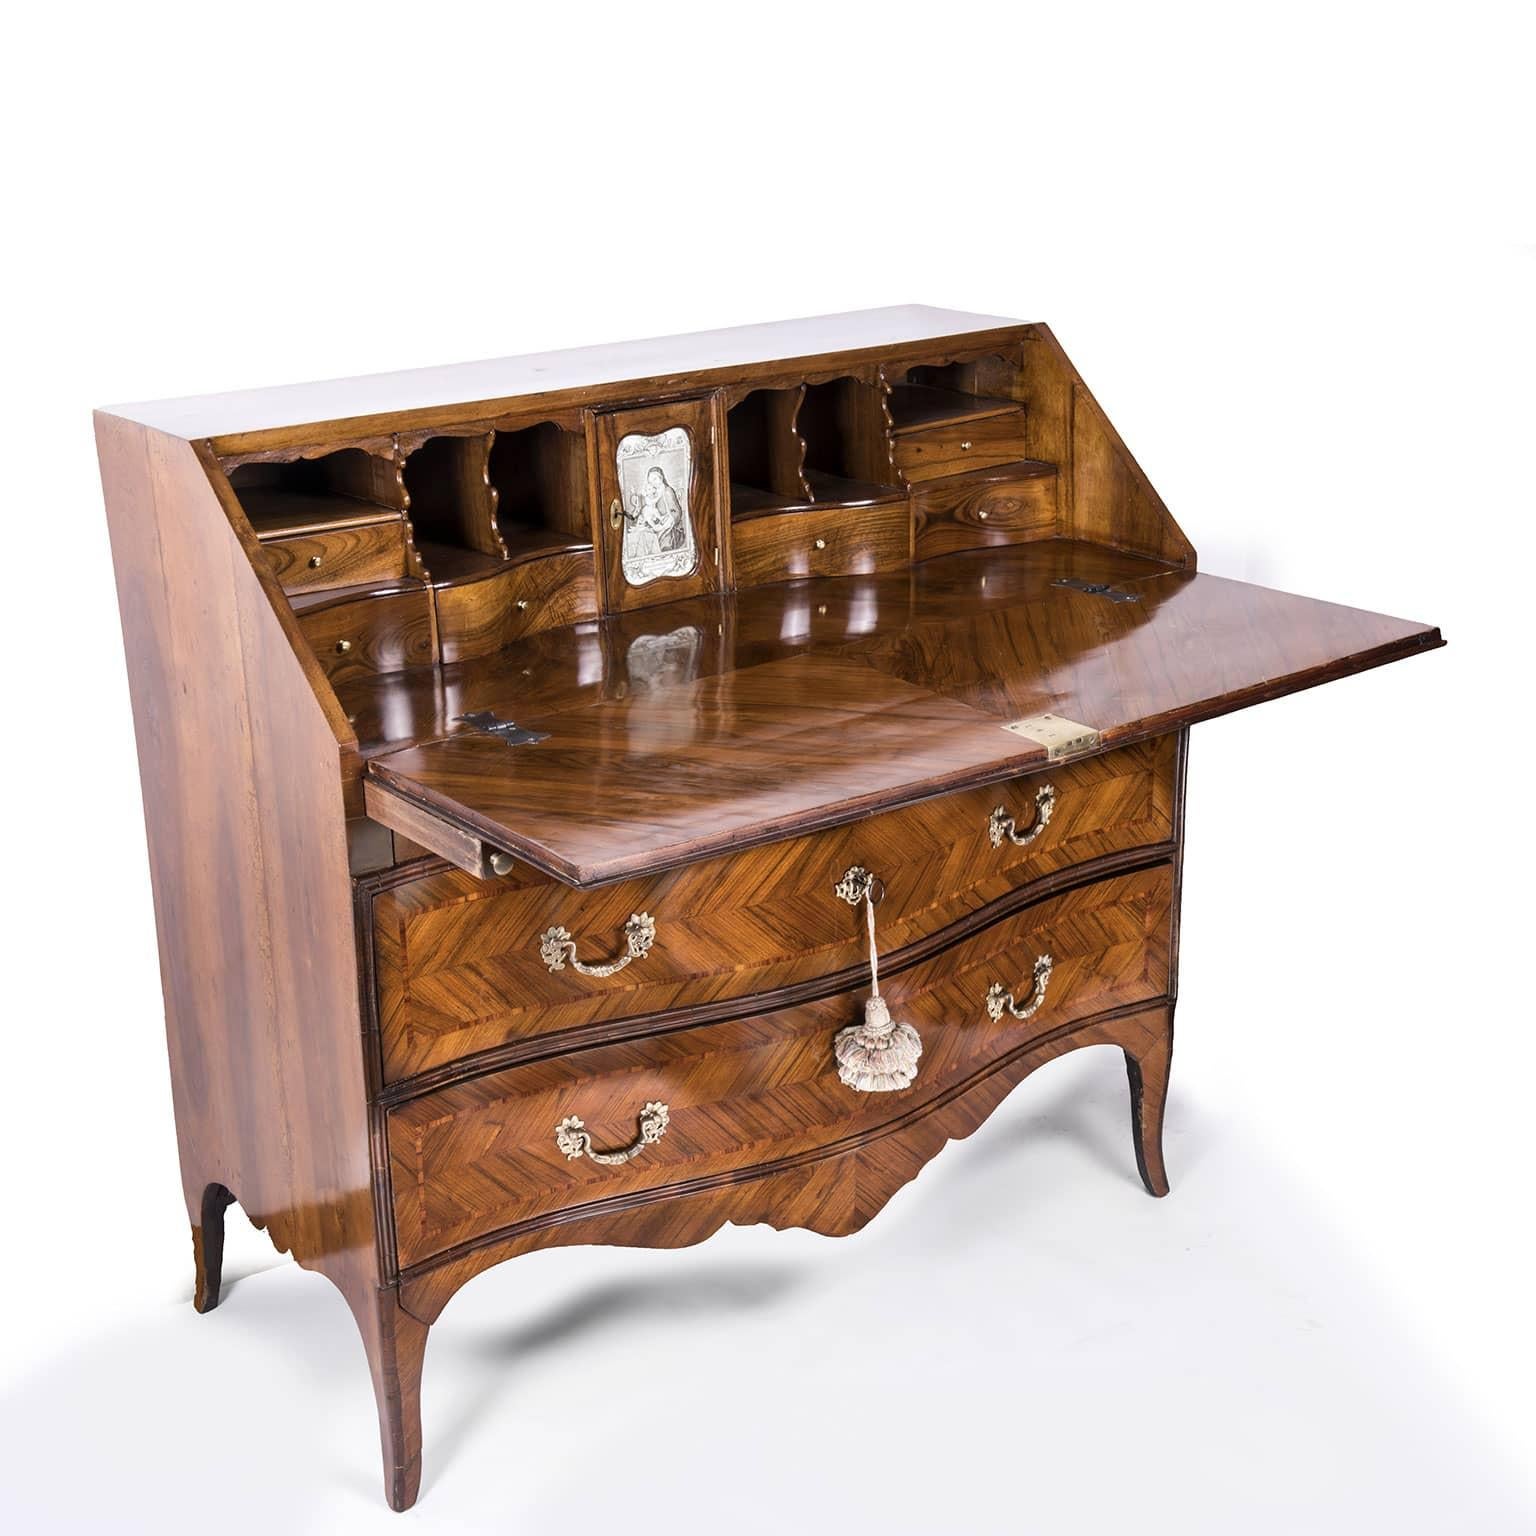 An exceptional Italian Genoese walnut veneered and inlaid fall front bureau secretaire desk, dating back to the third quarter of 18th century, of Genoese origin.
The fall opening to a fitted interior of six small drawers, pigeon holes and one